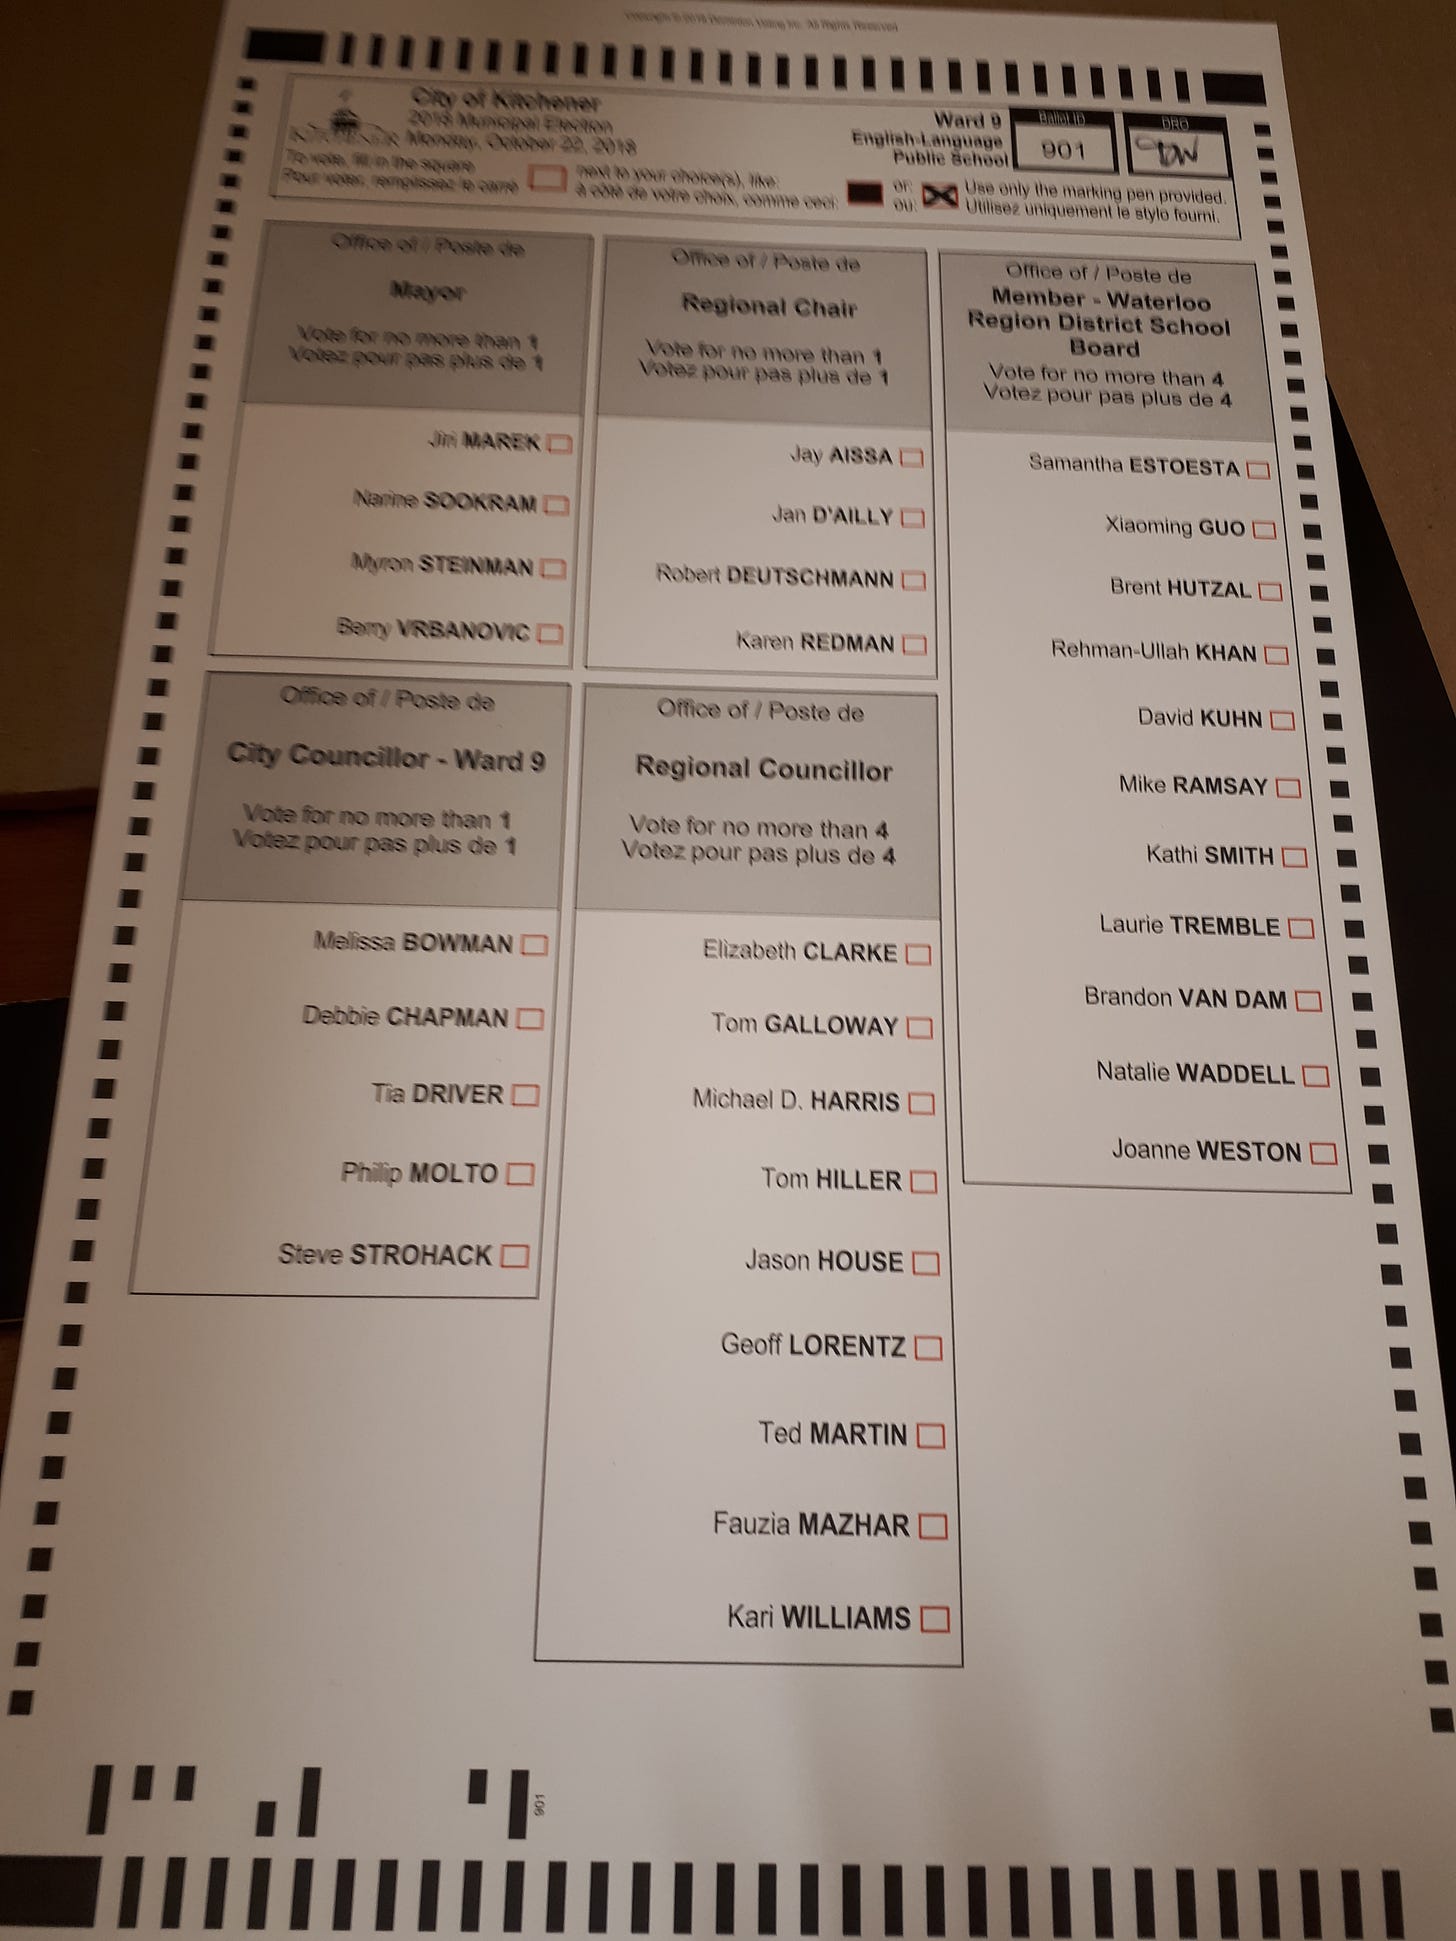 Voting ballot from 2018 Kitchener ward 9, outlining the dozens of names of people one could vote for.